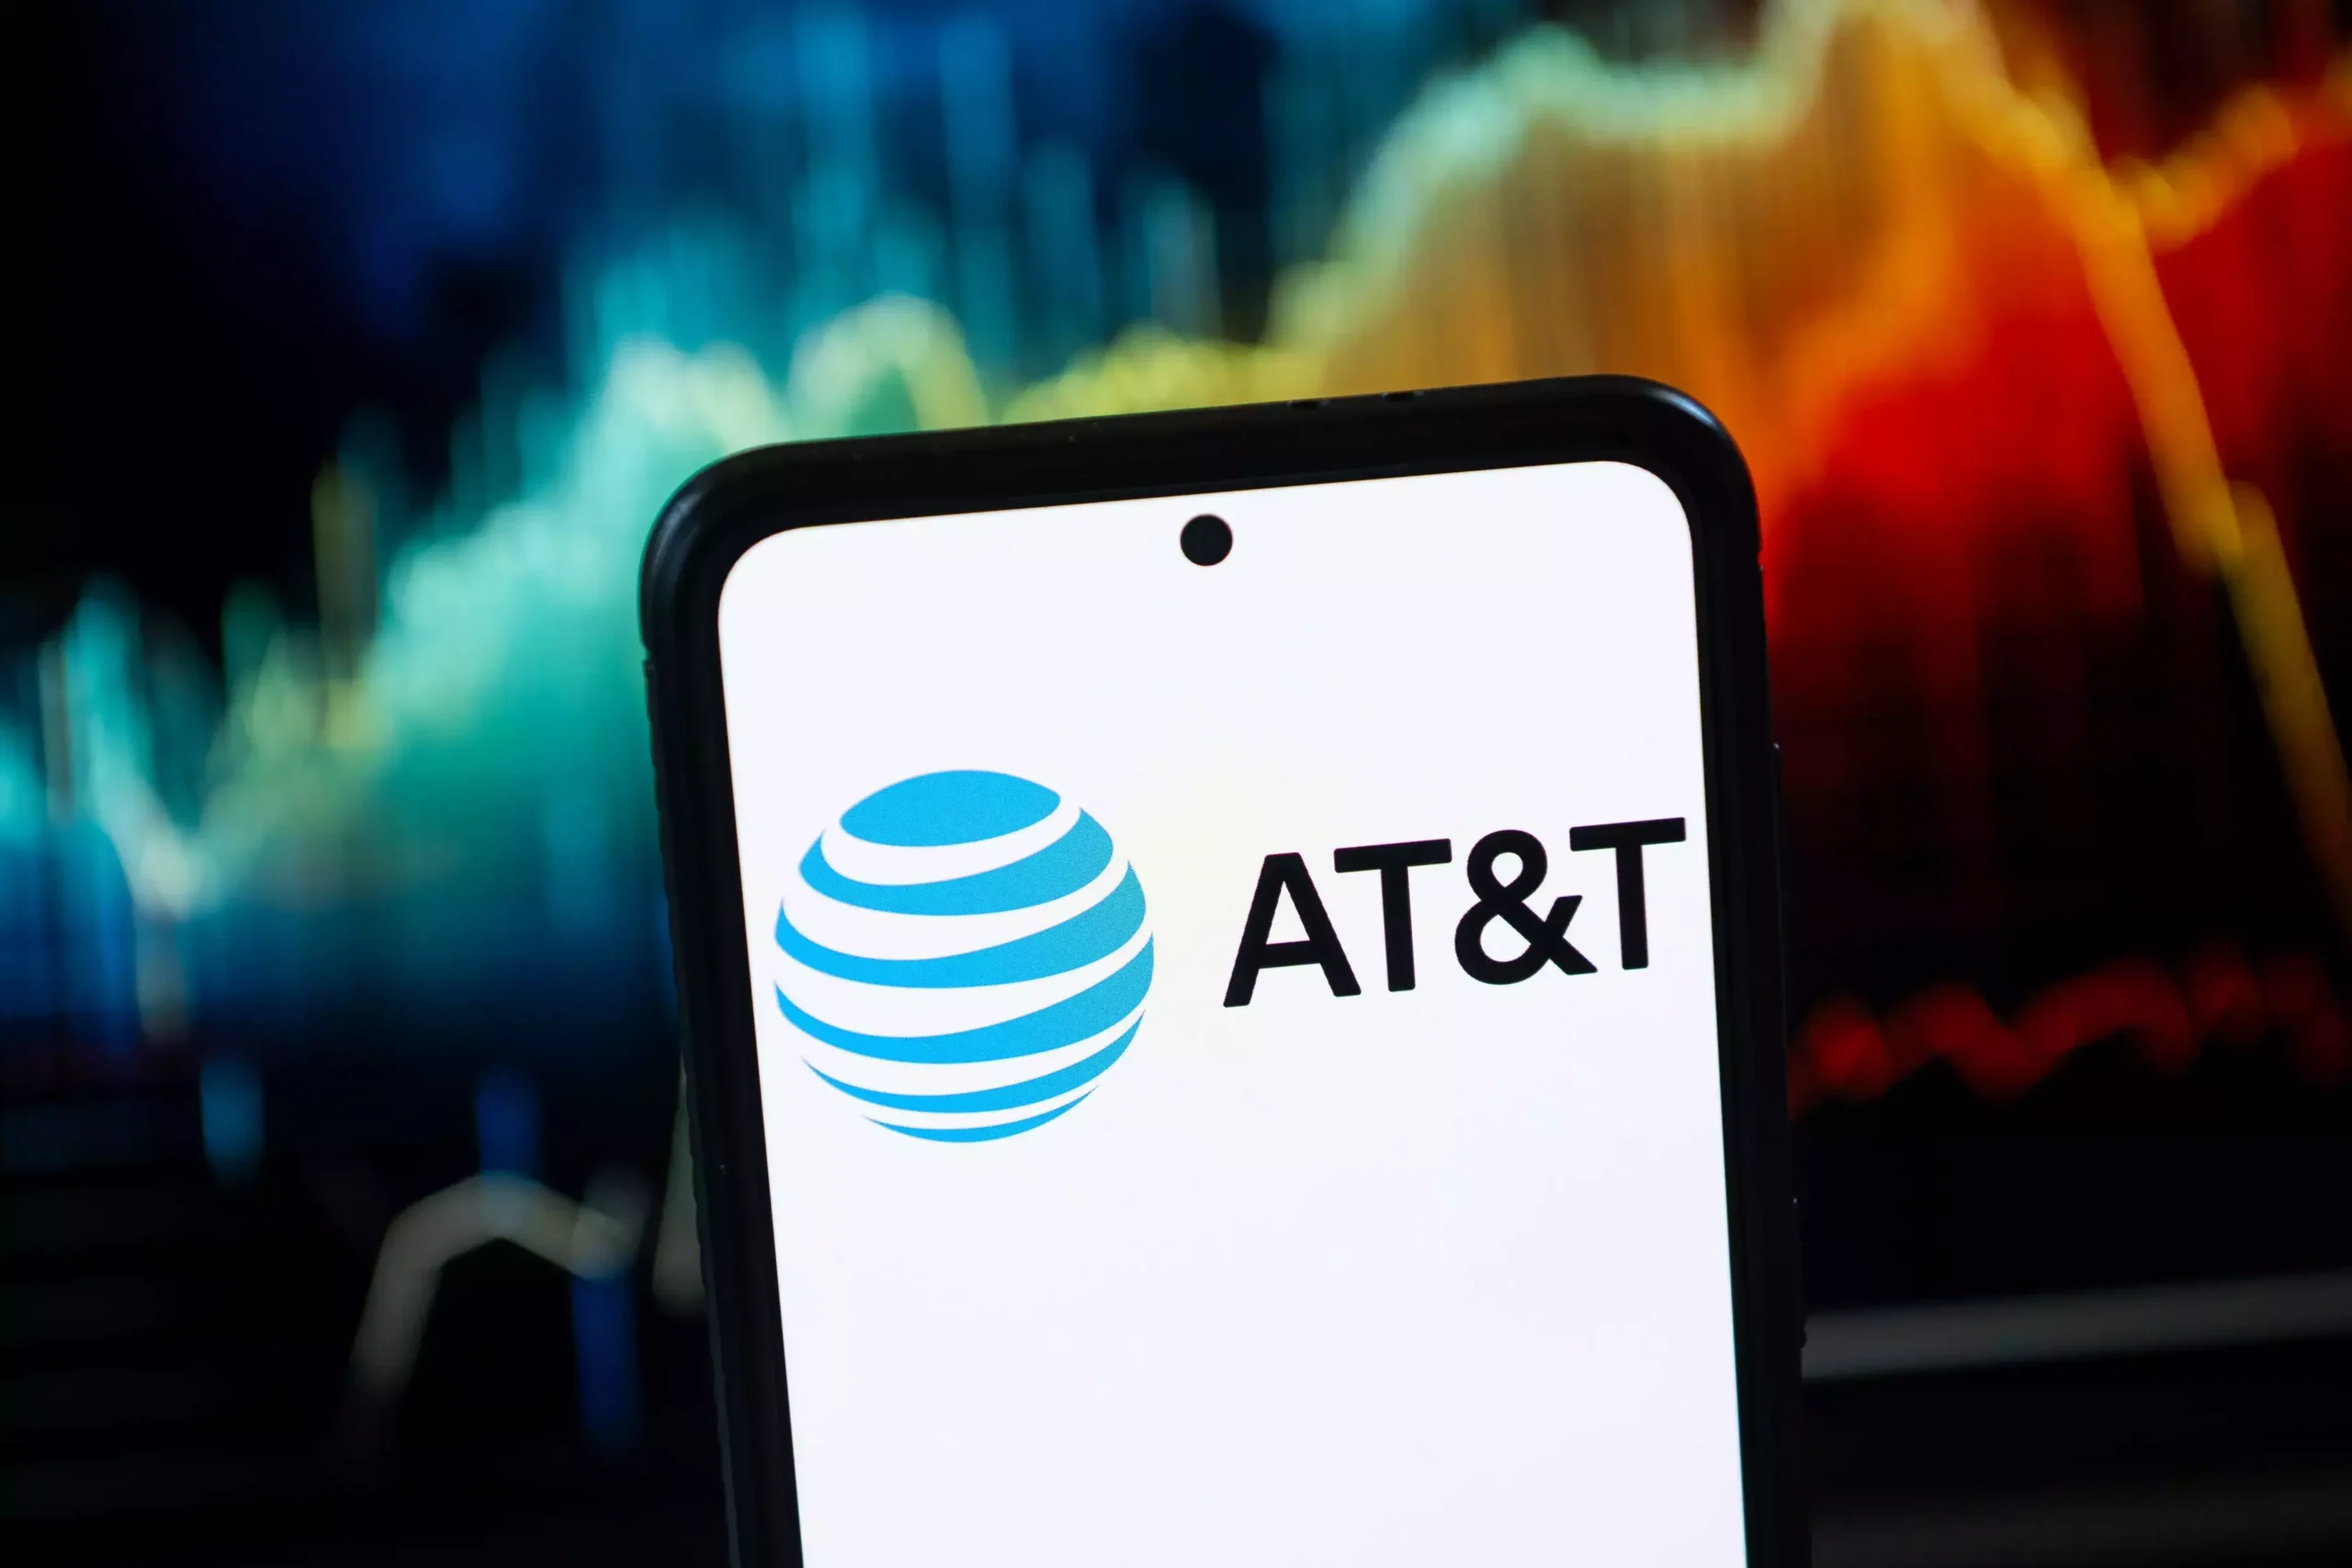 AT&T networks